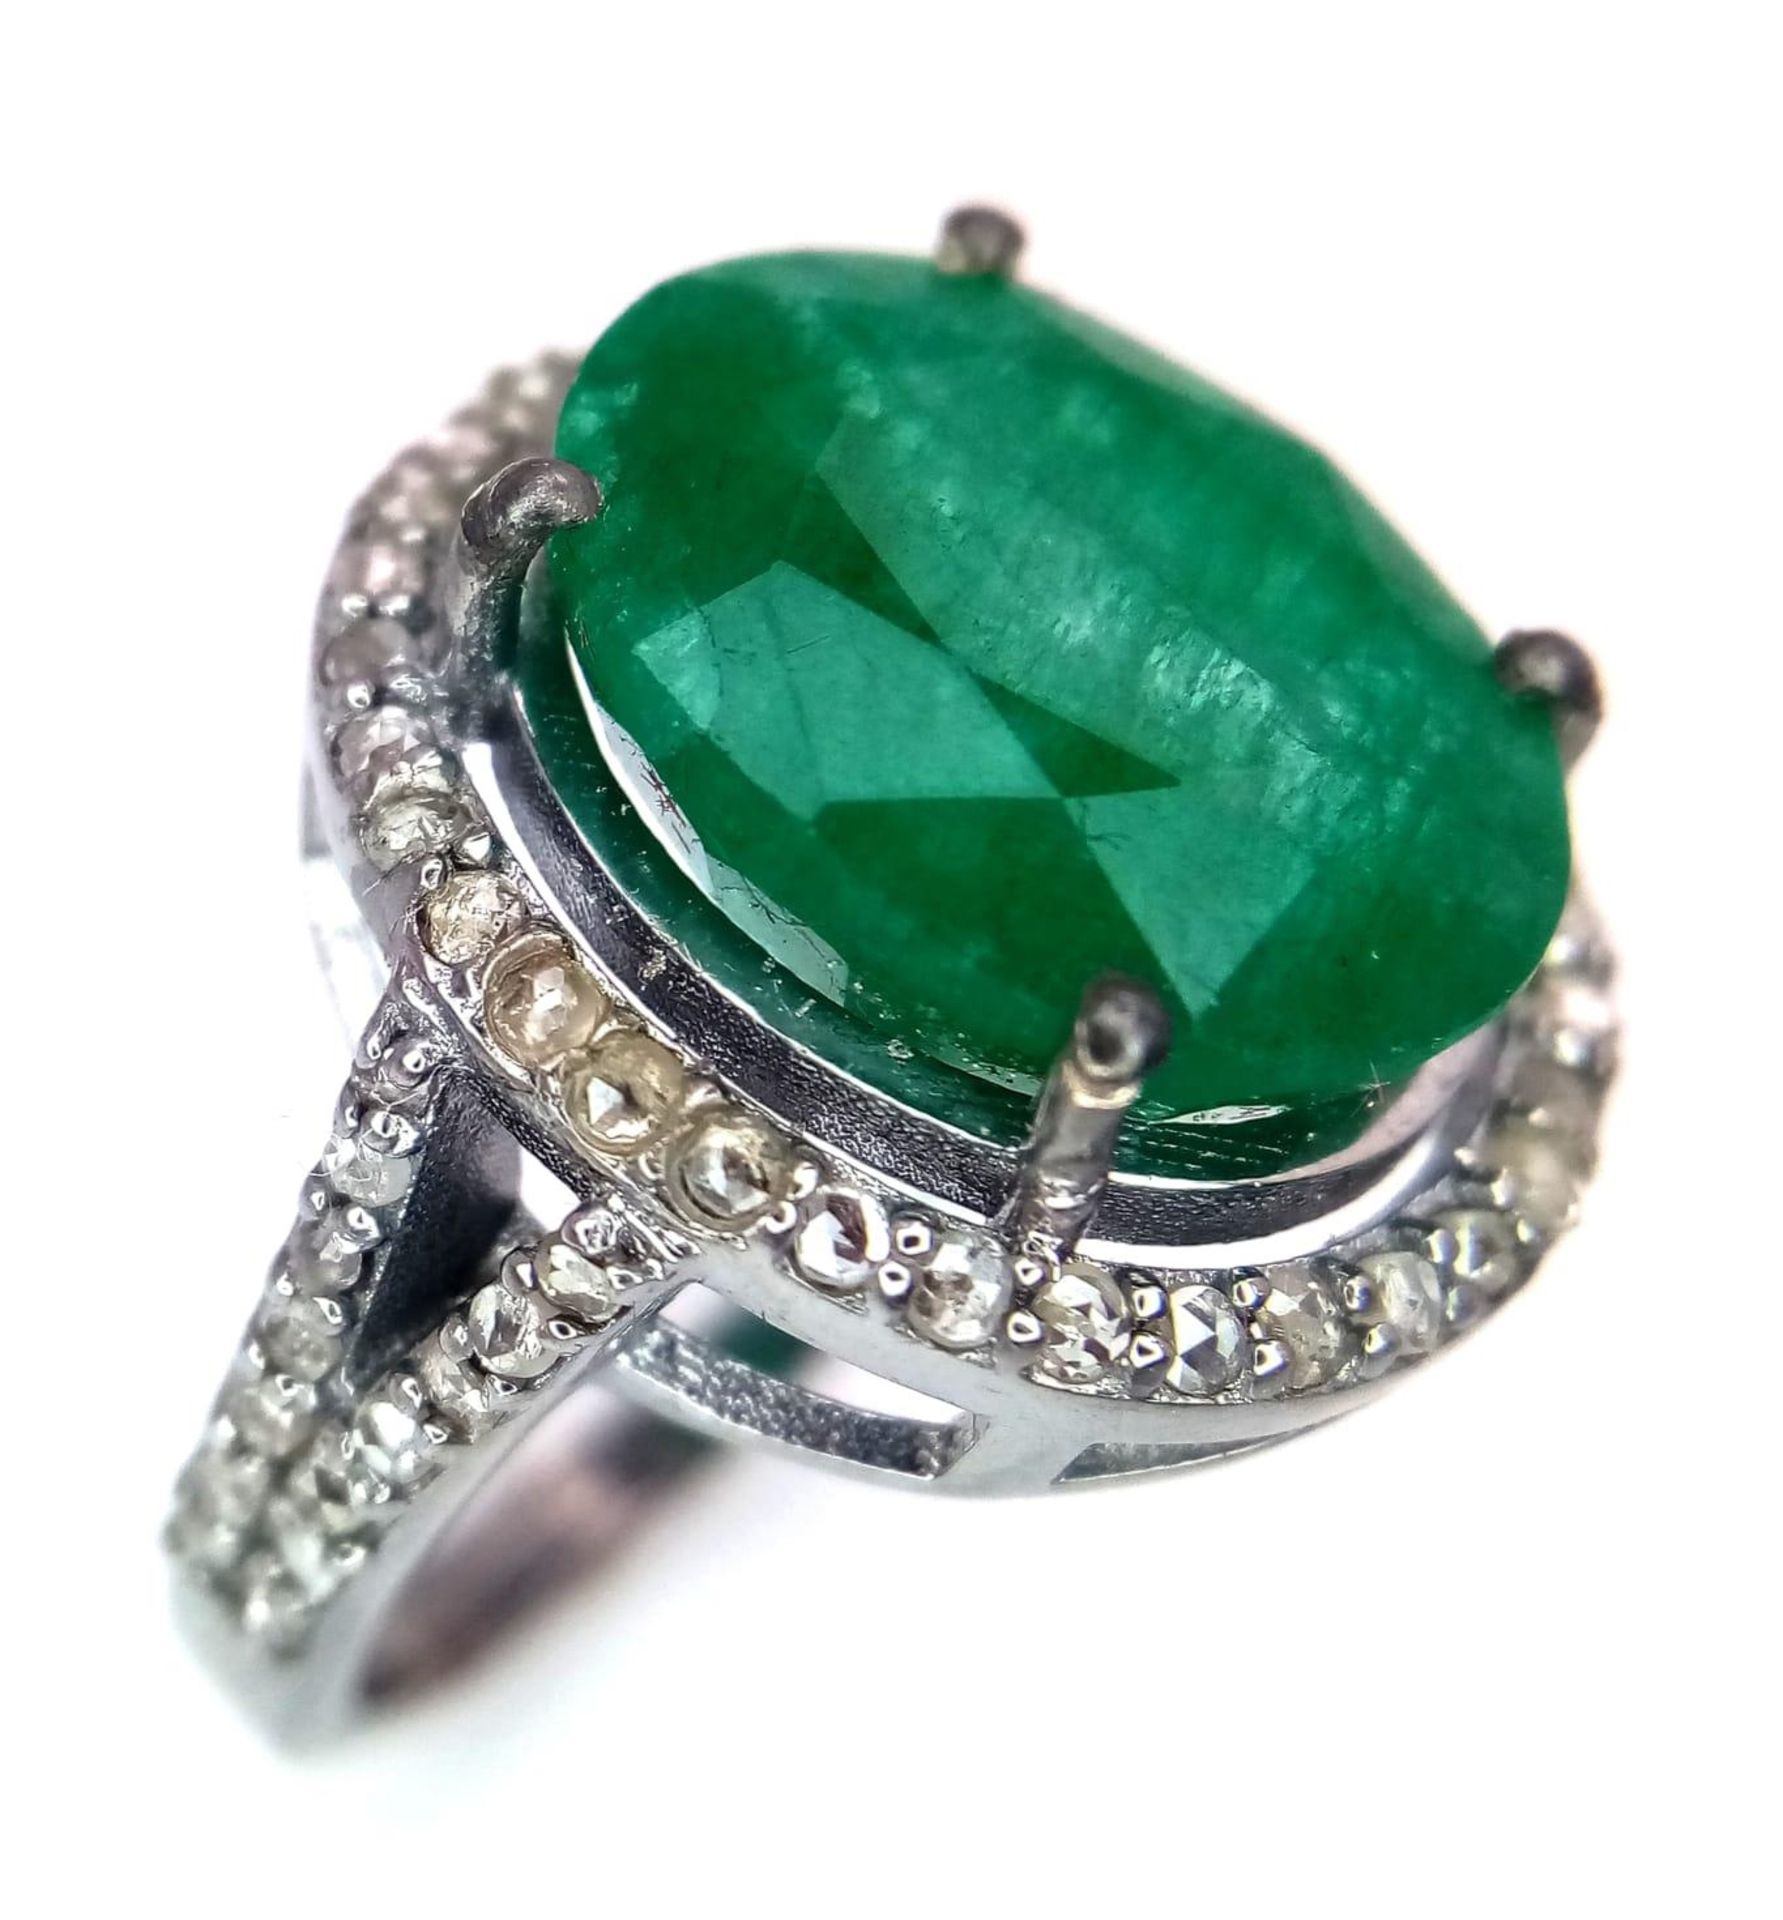 An Emerald Ring with a Halo of Diamonds on 925 Silver. 7.55ct emerald, 0.67ctw diamonds. Size N, 4. - Image 3 of 6